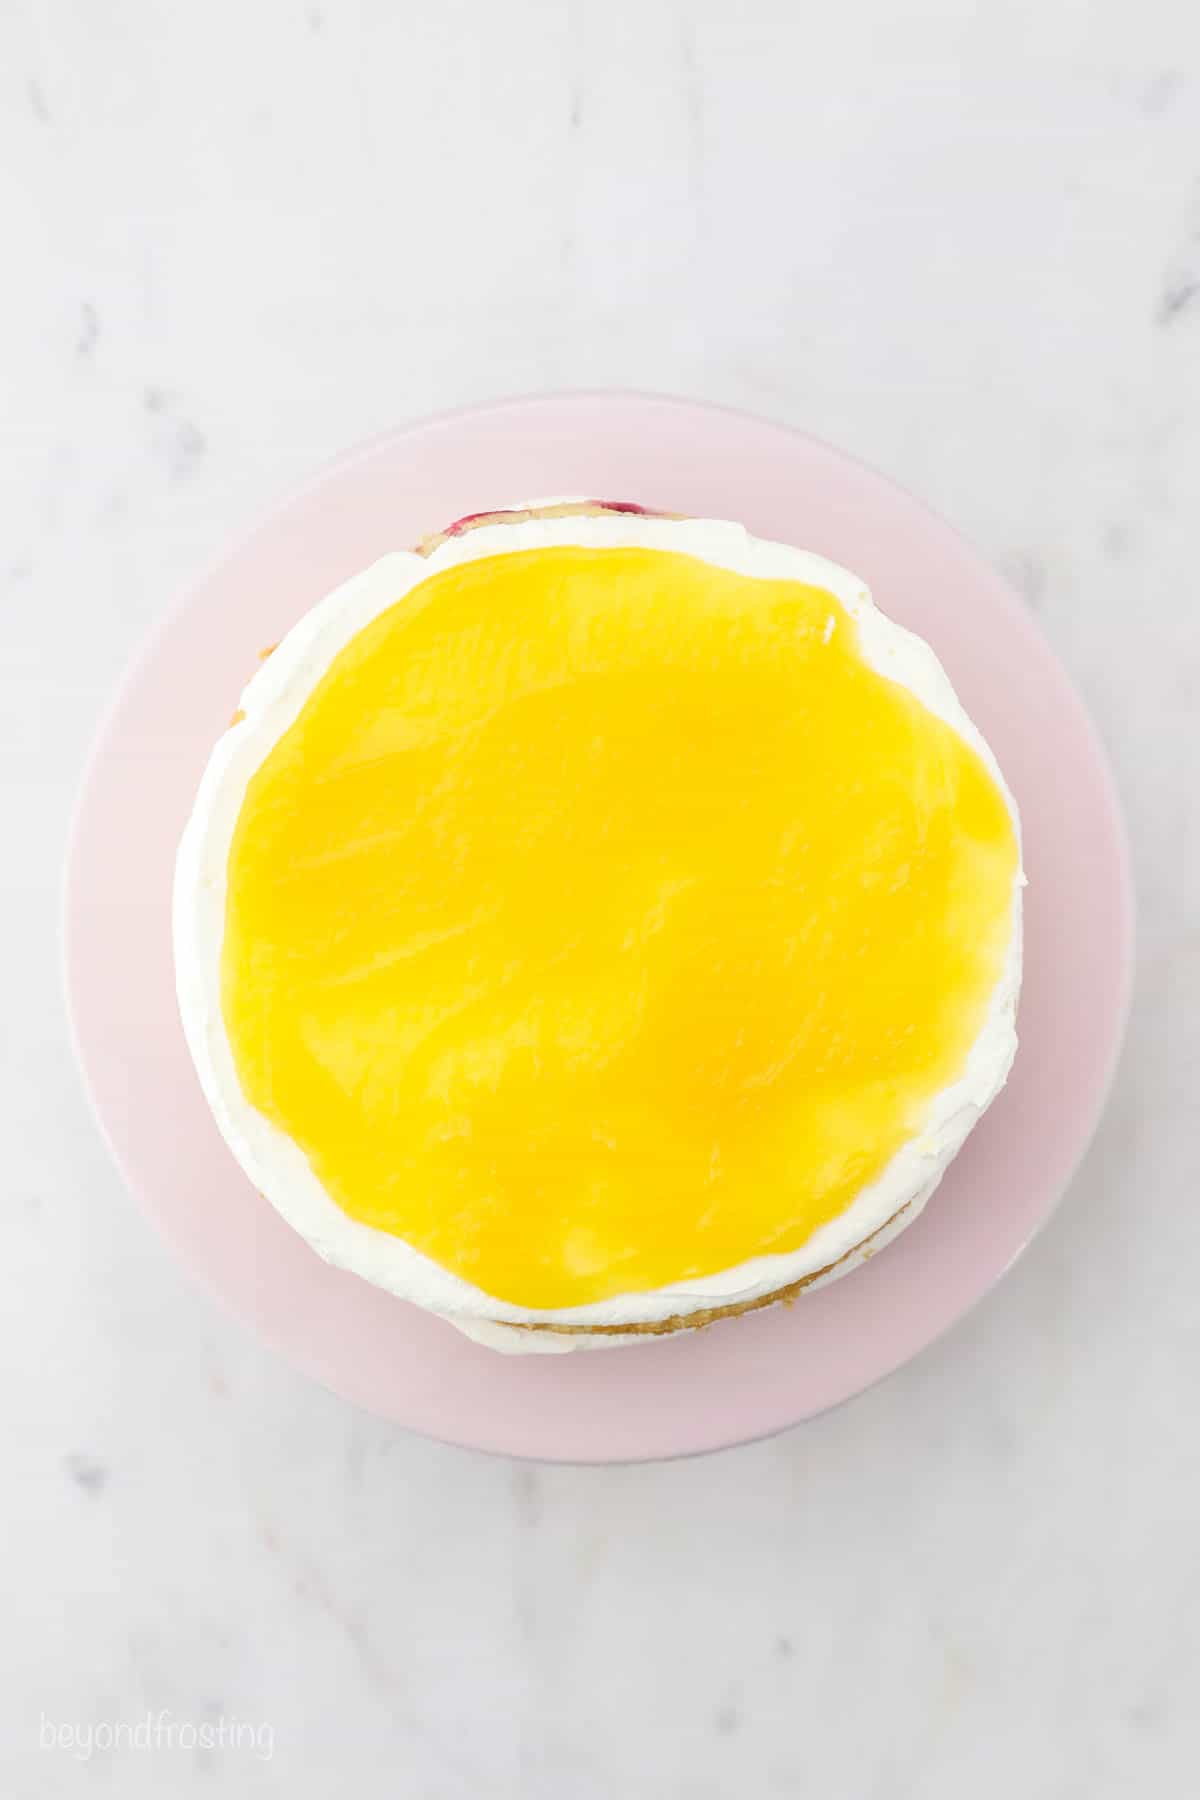 Lemon curd layered on top of mascarpone frosting on a cake